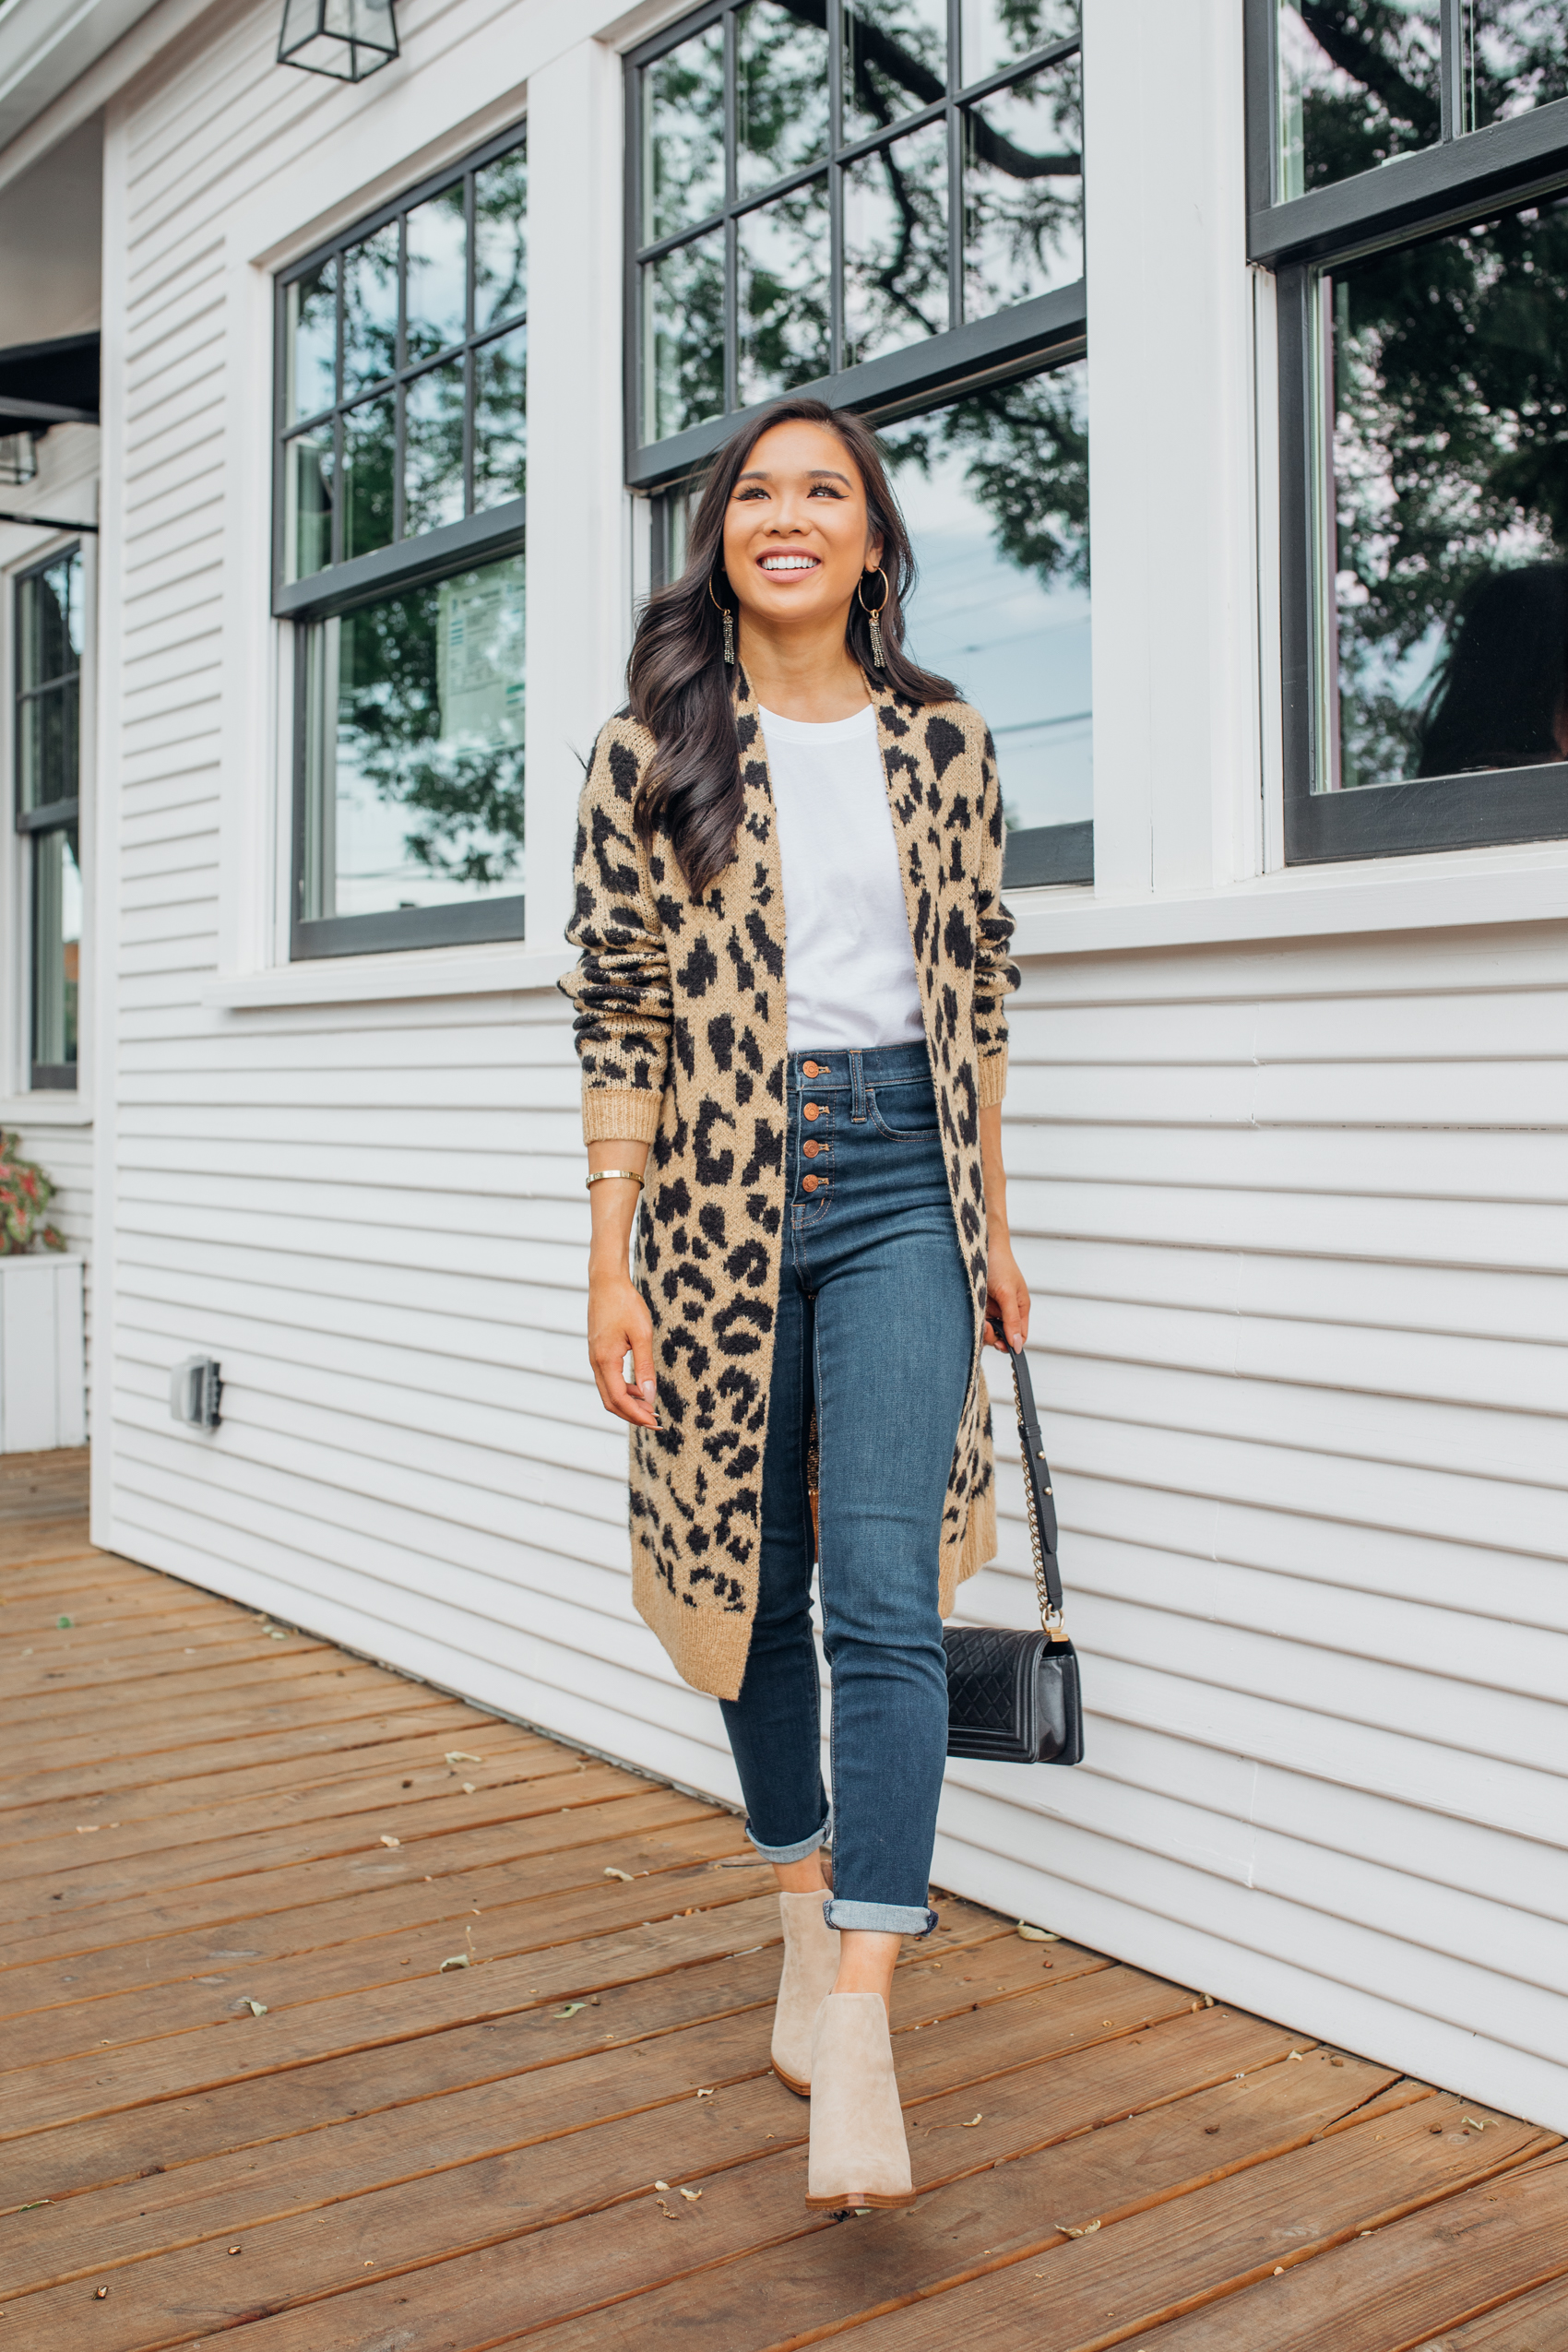 Leopard cardigan outfit for summer and fall with tan booties